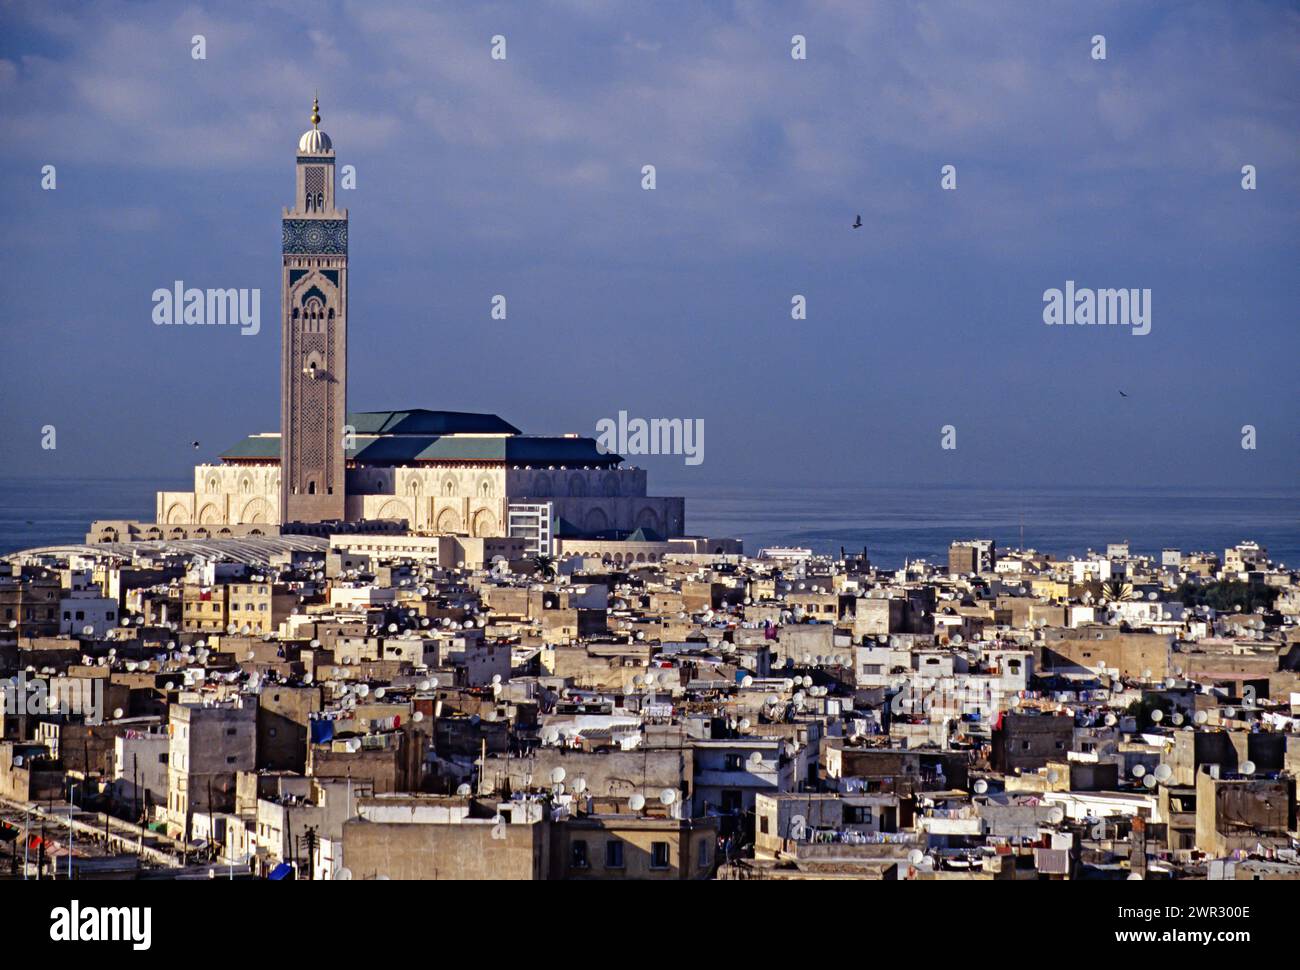 Casablanca, Morocco.   Satellite Dishes Cover the Rooftops in the Medina of Casablanca, Mosque of Hassan II in Background. Stock Photo